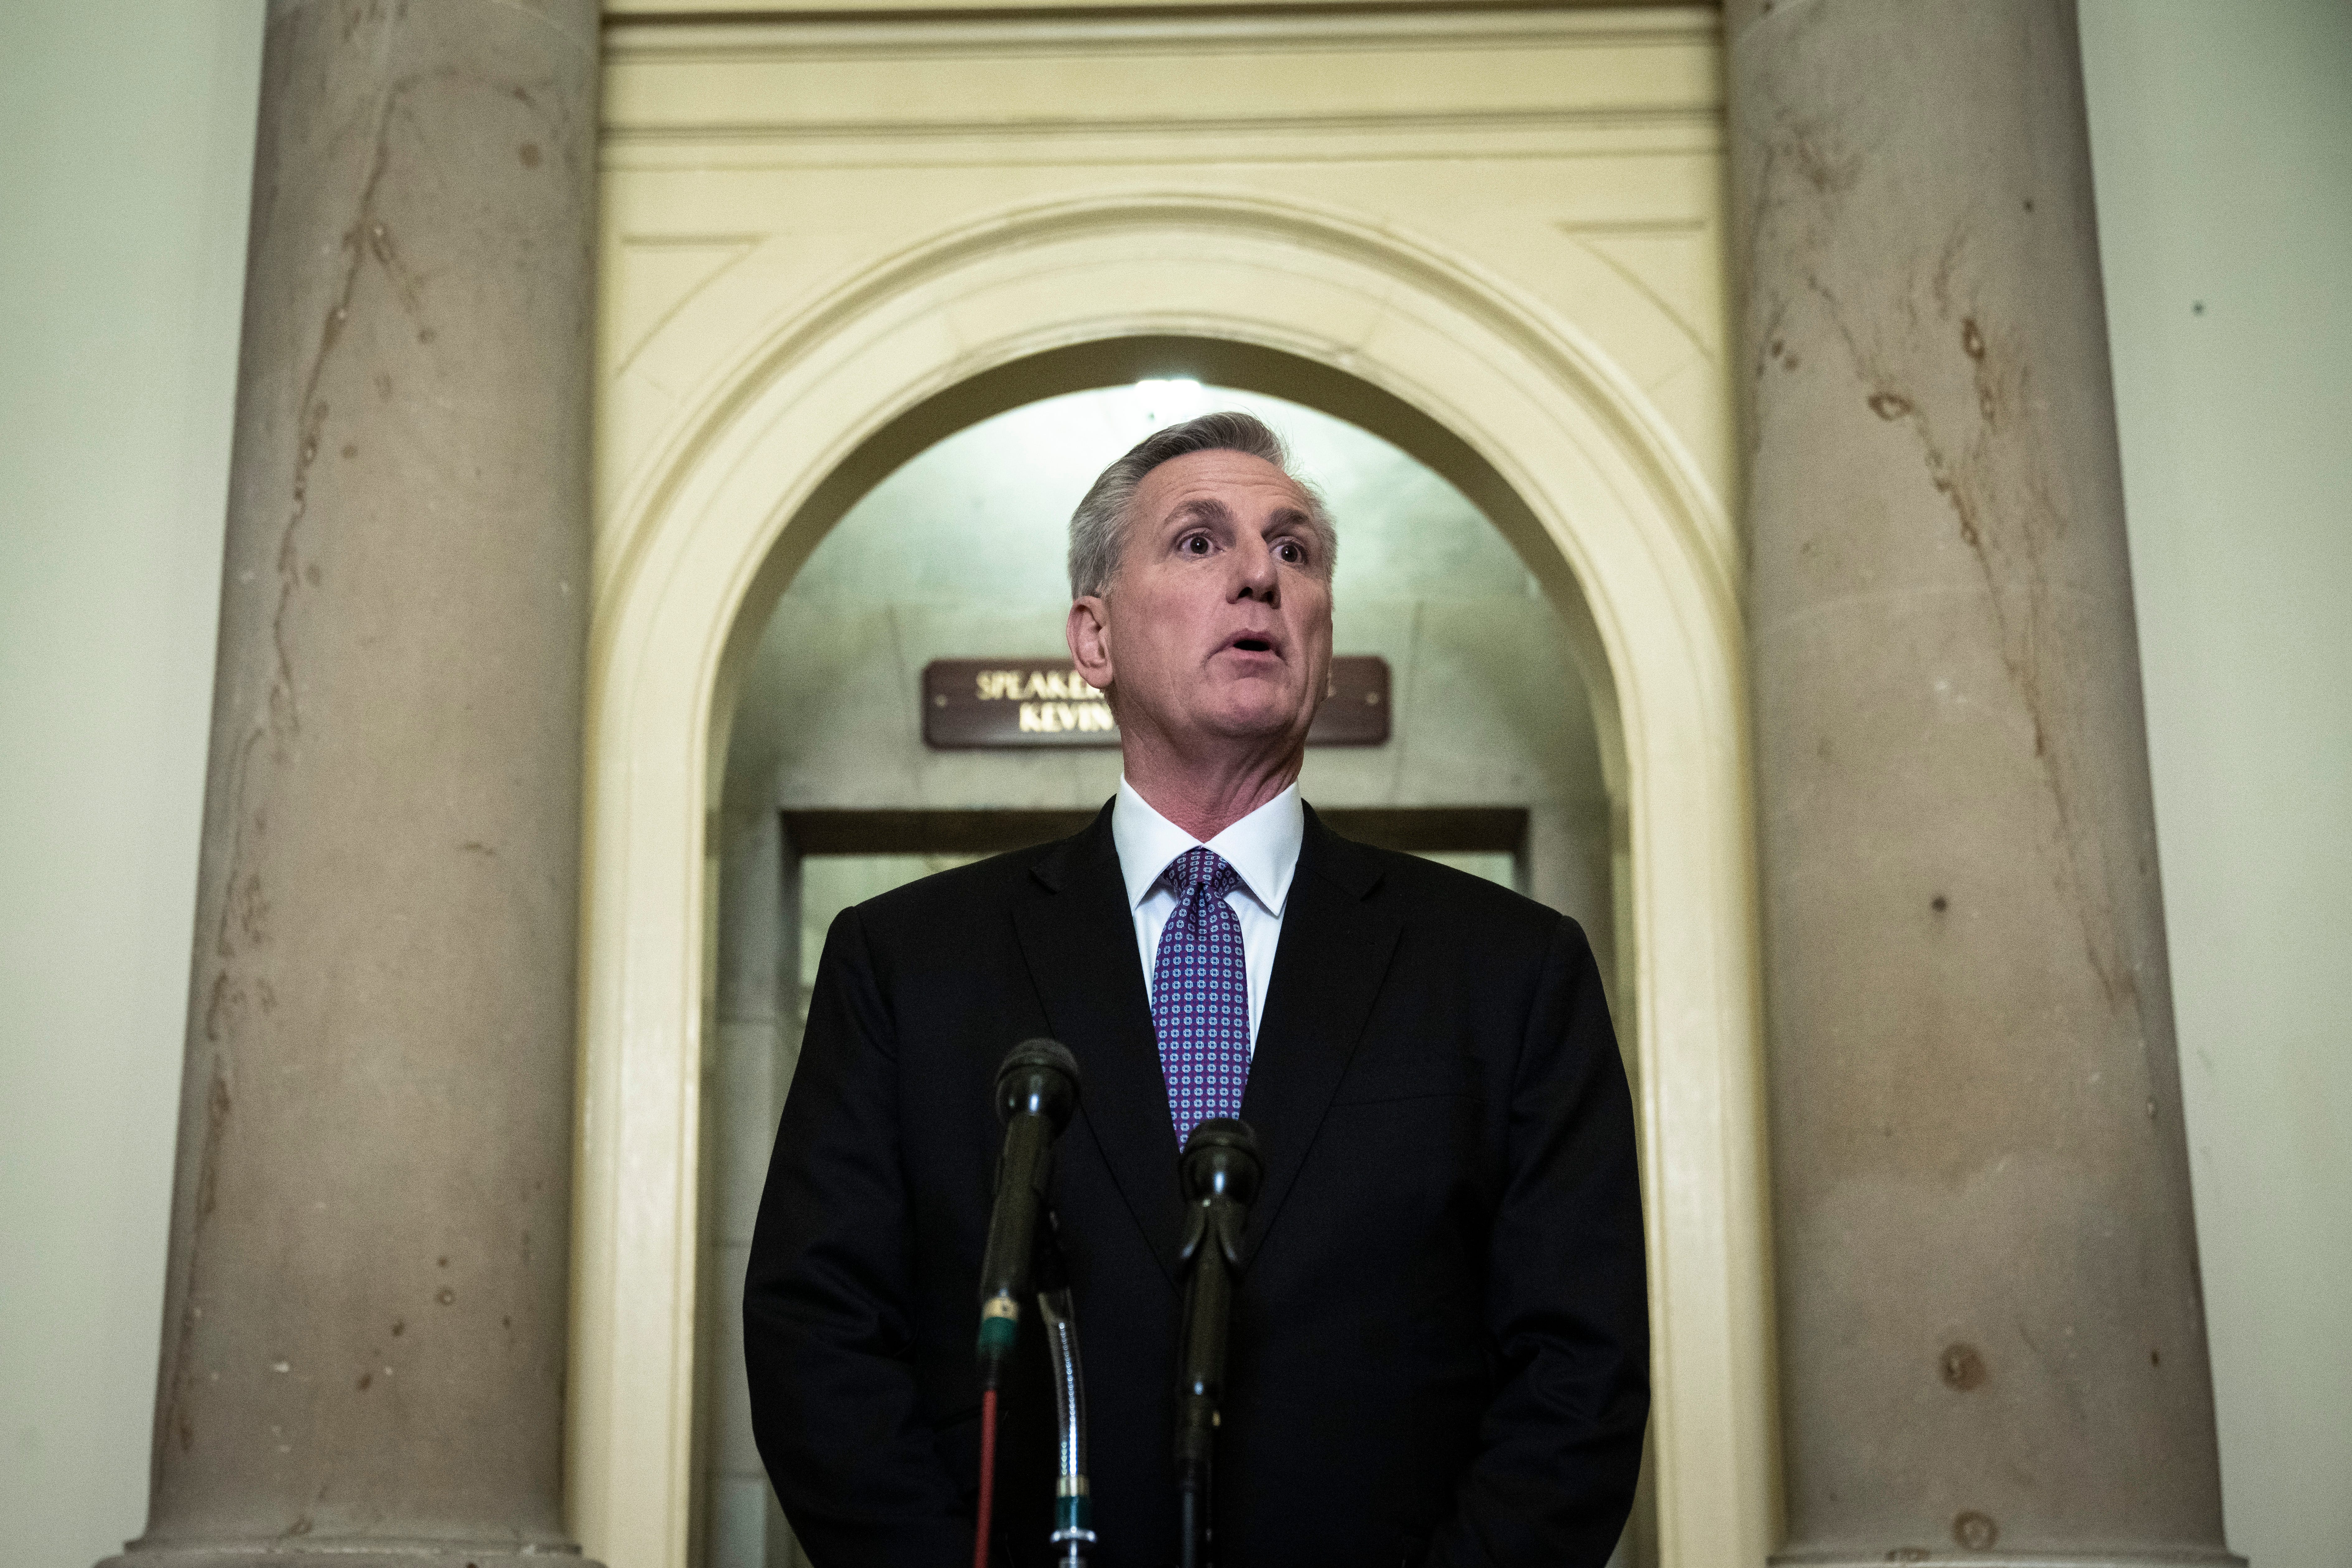 Speaker McCarthy: Santos could be removed from Congress if ethics probe finds he broke law